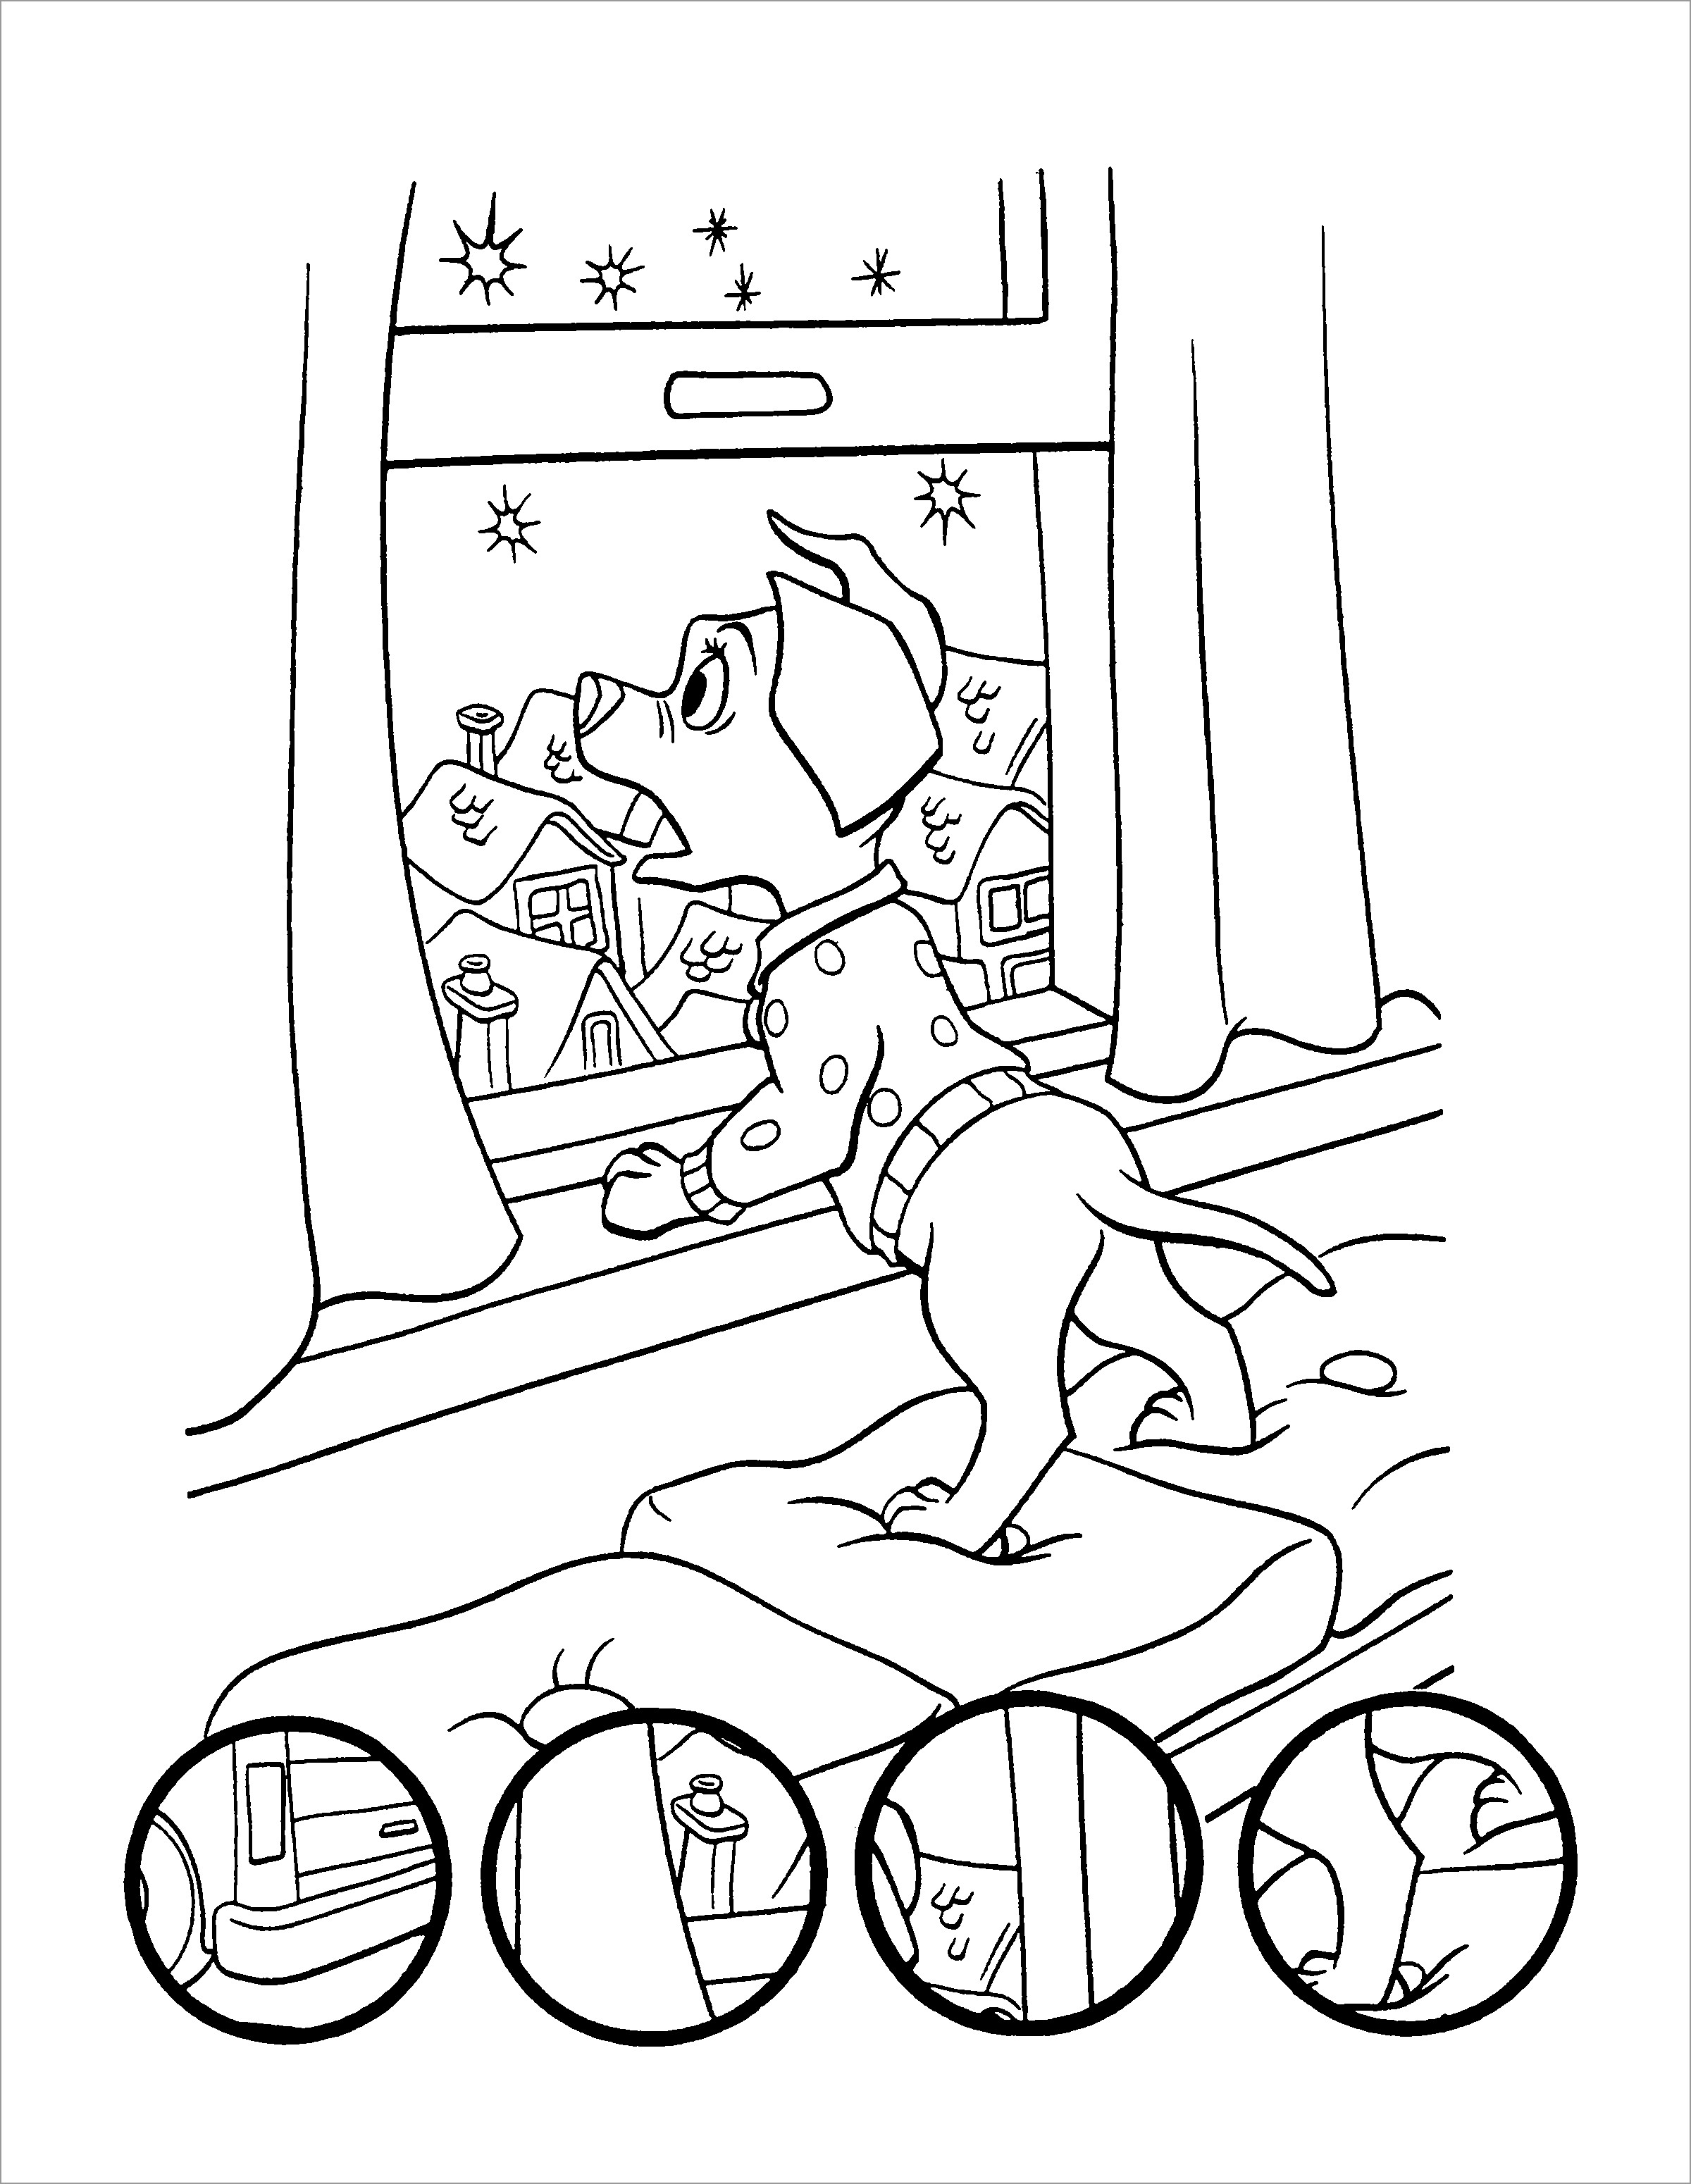 Coloring Pages Of 101 Dalmatians